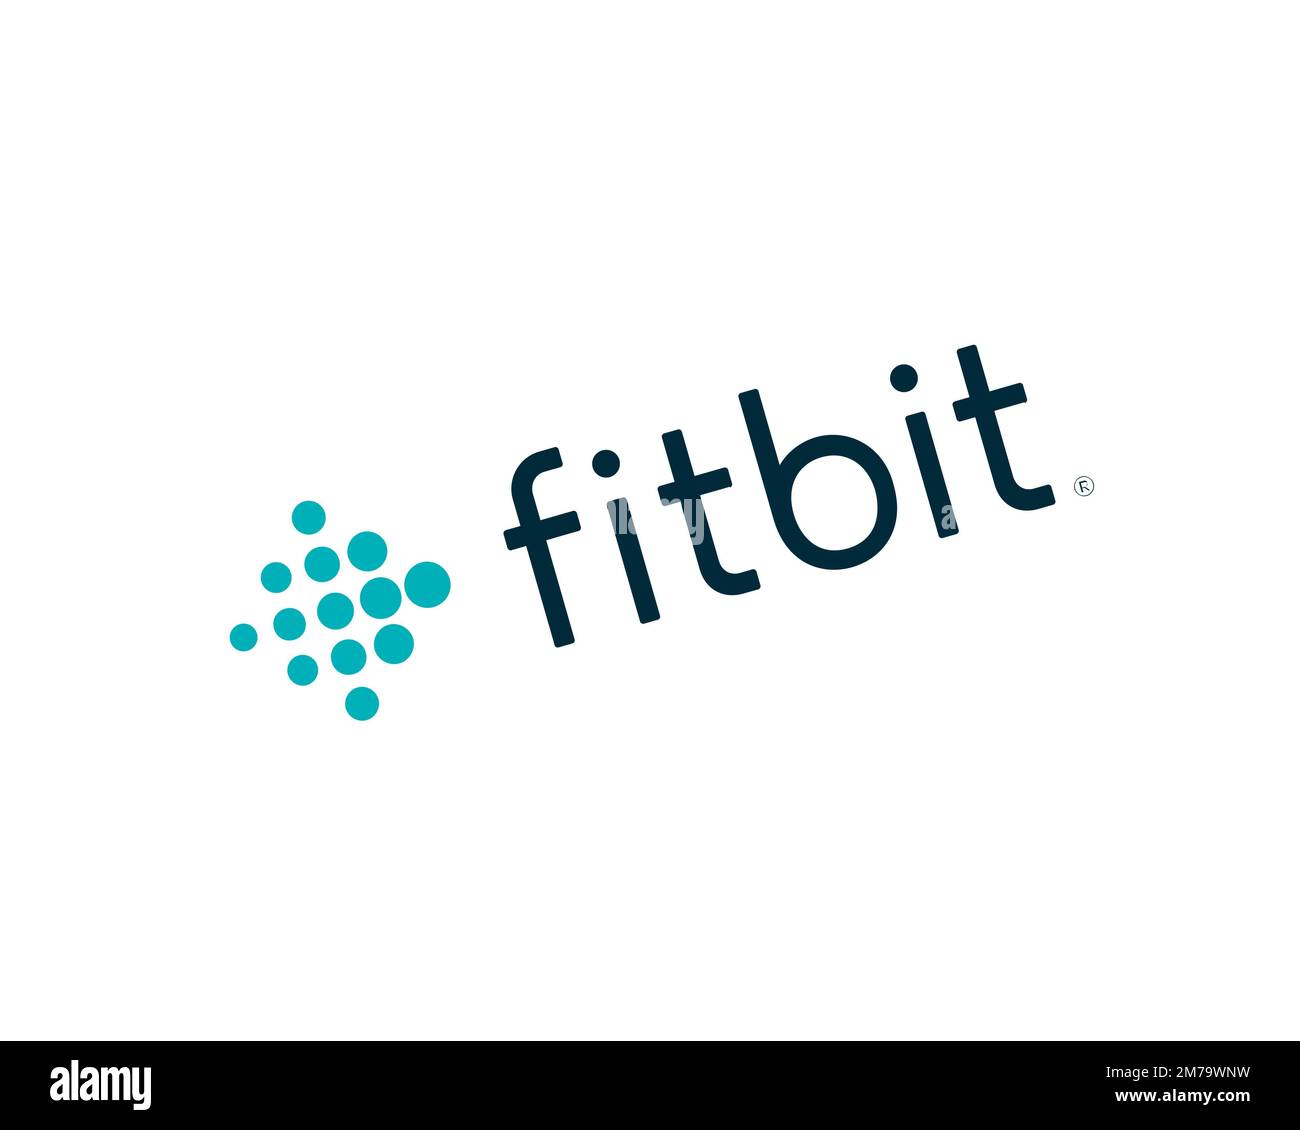 Fitbit, Rotated Logo, White Background Stock Photo - Alamy